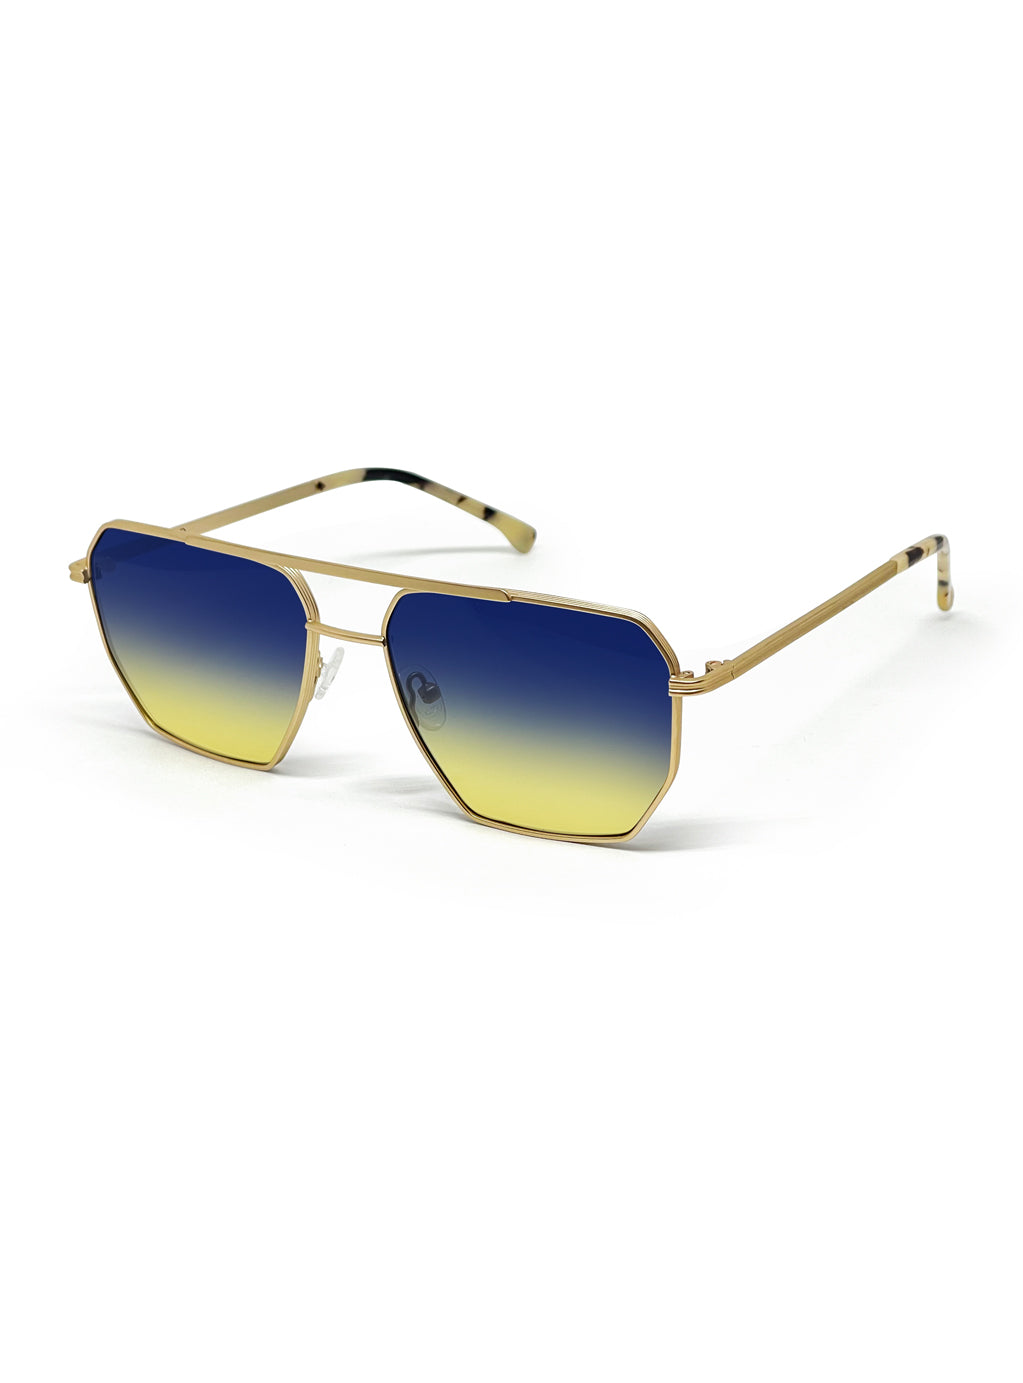 OKTO Gold with Blue/Yellow Gradient Lenses